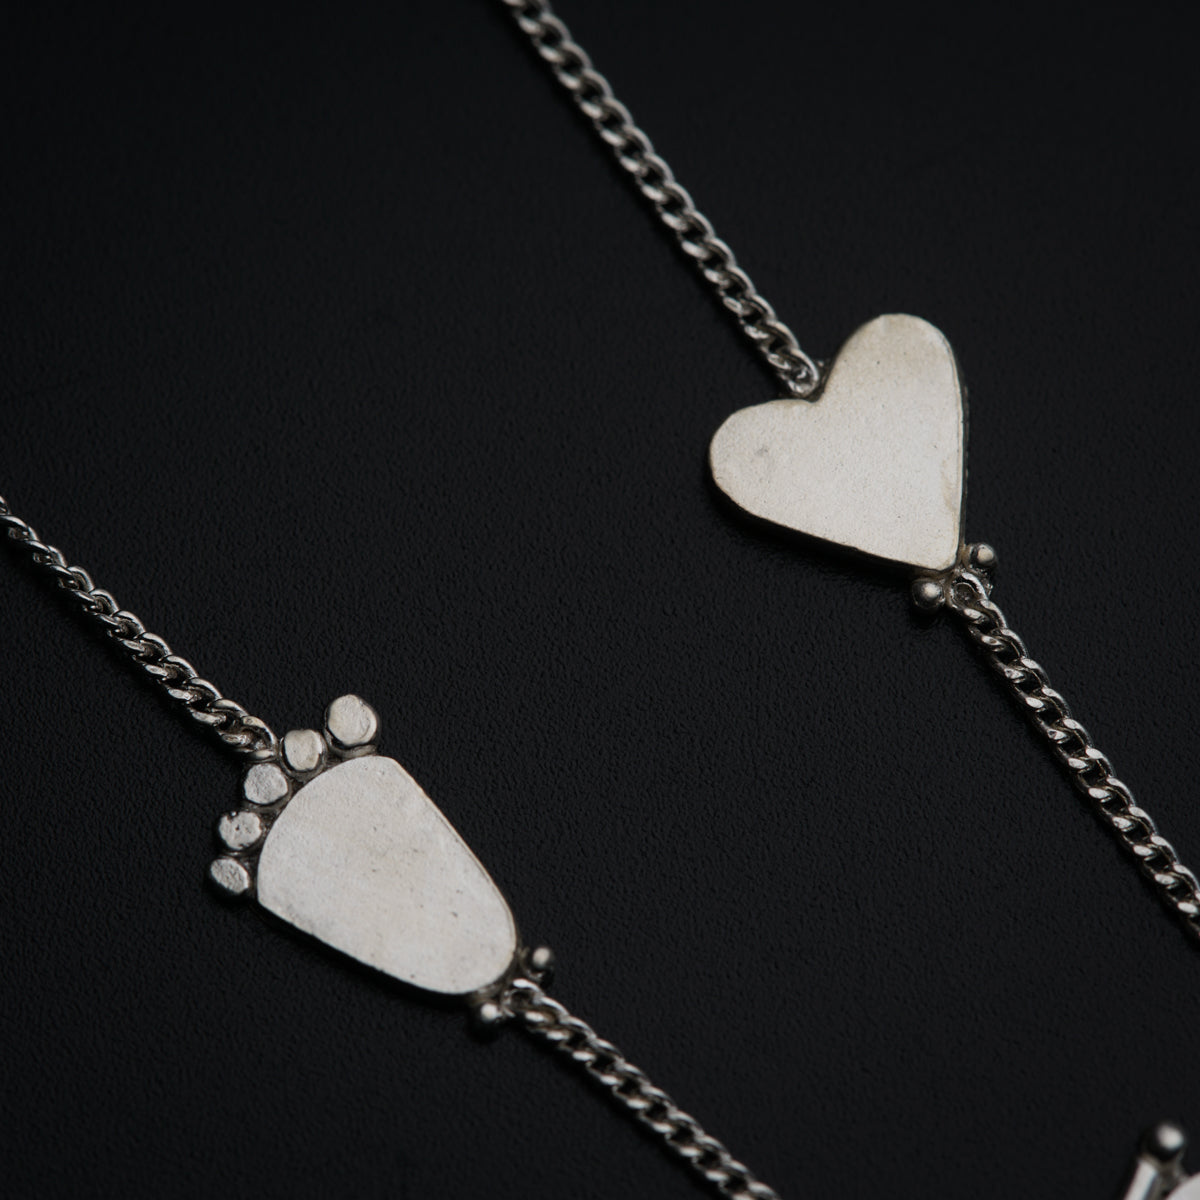 a couple of necklaces that have hearts on them